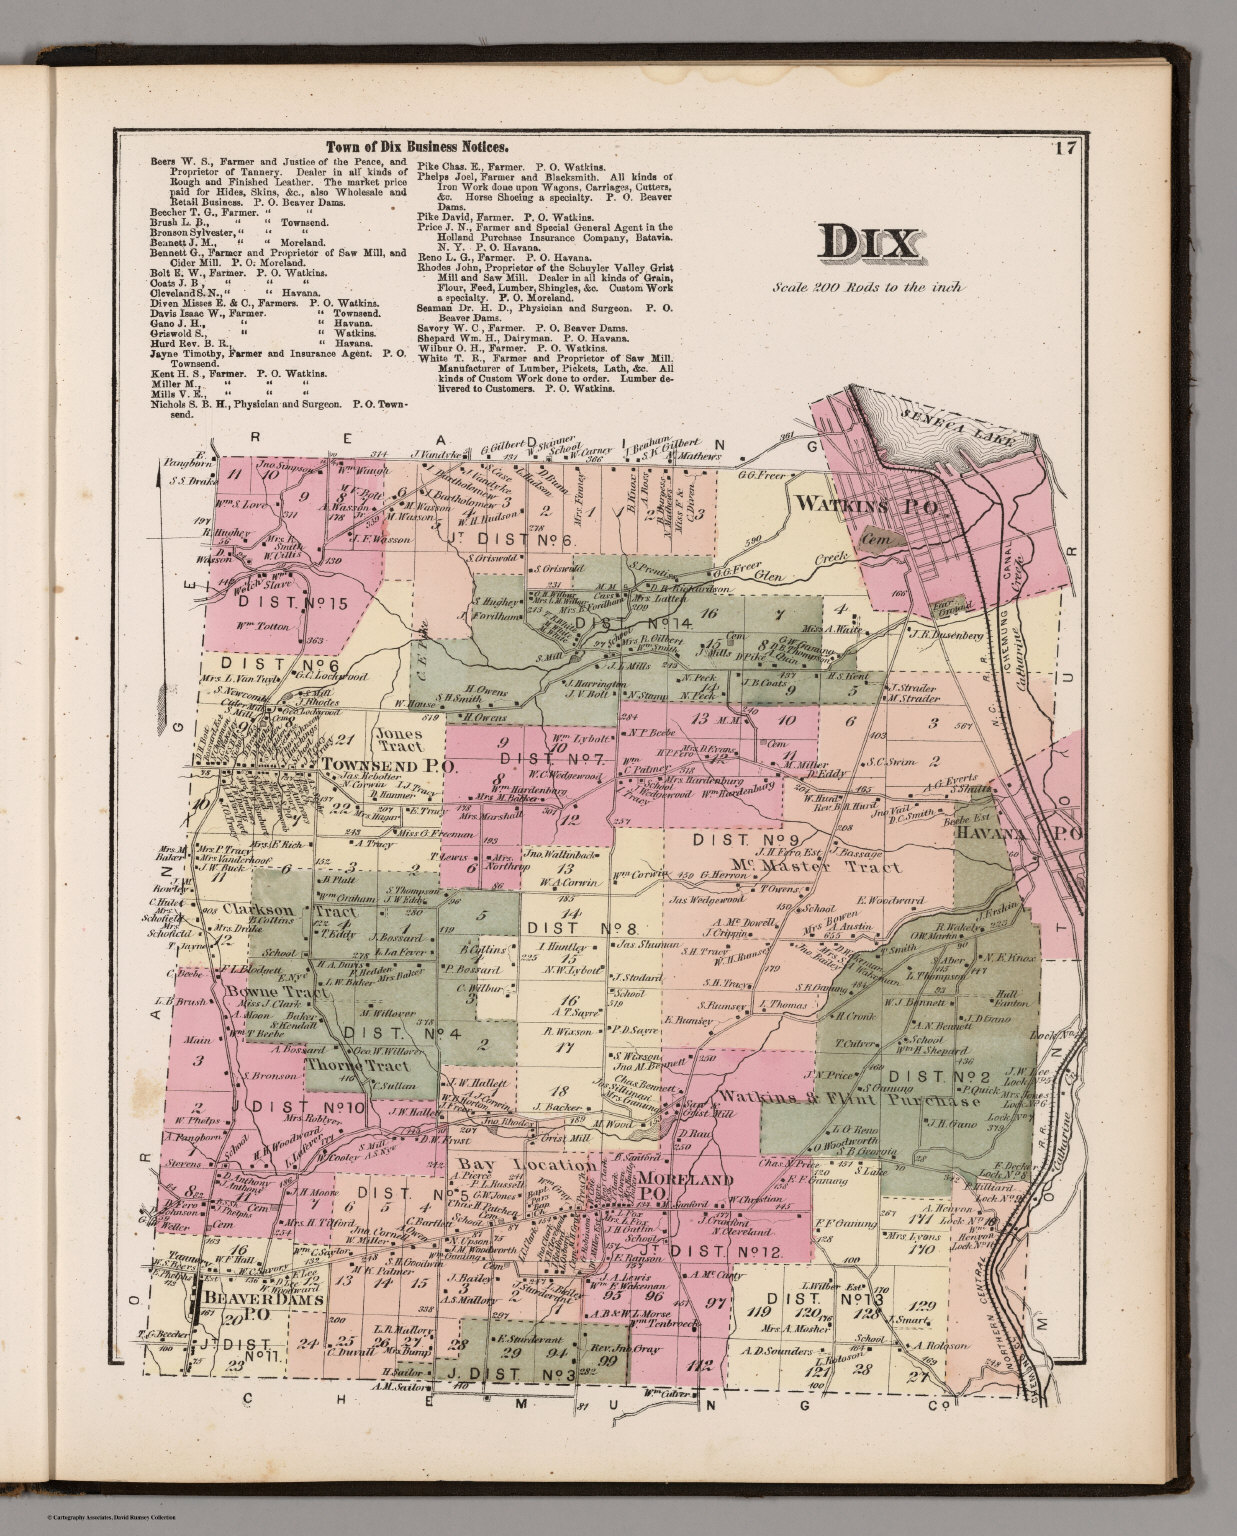 Dix Schuyler County New York David Rumsey Historical Map Collection